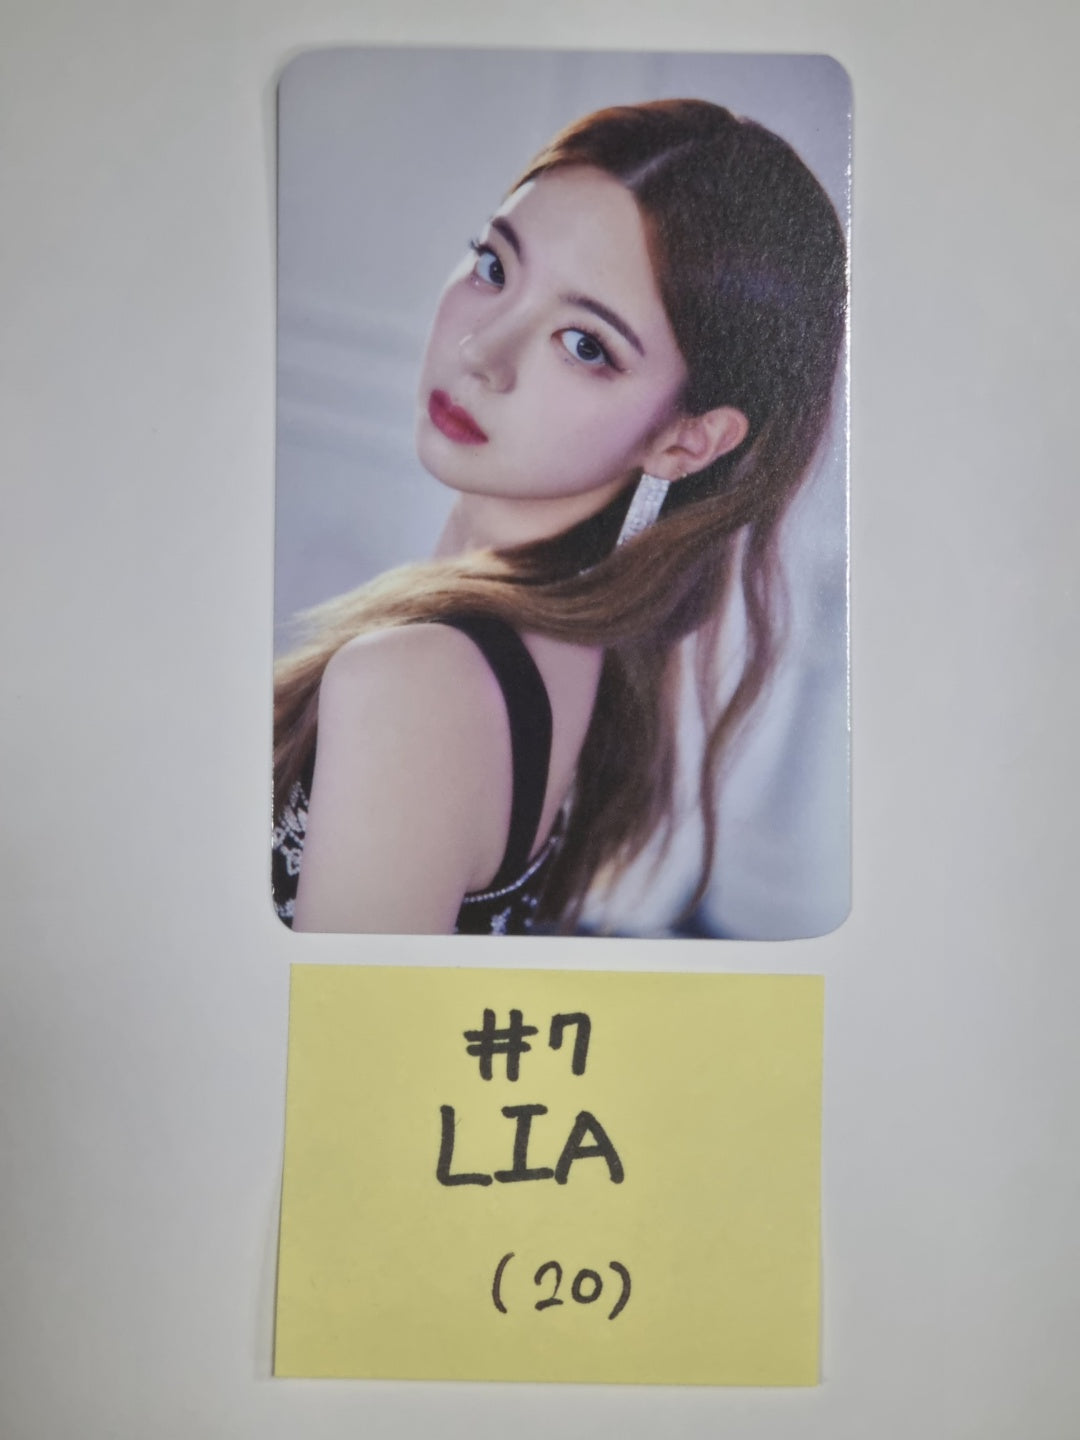 YESASIA: ITZY PHOTO SLOGAN- THE 1ST WORLD TOUR CHECKMATE Celebrity